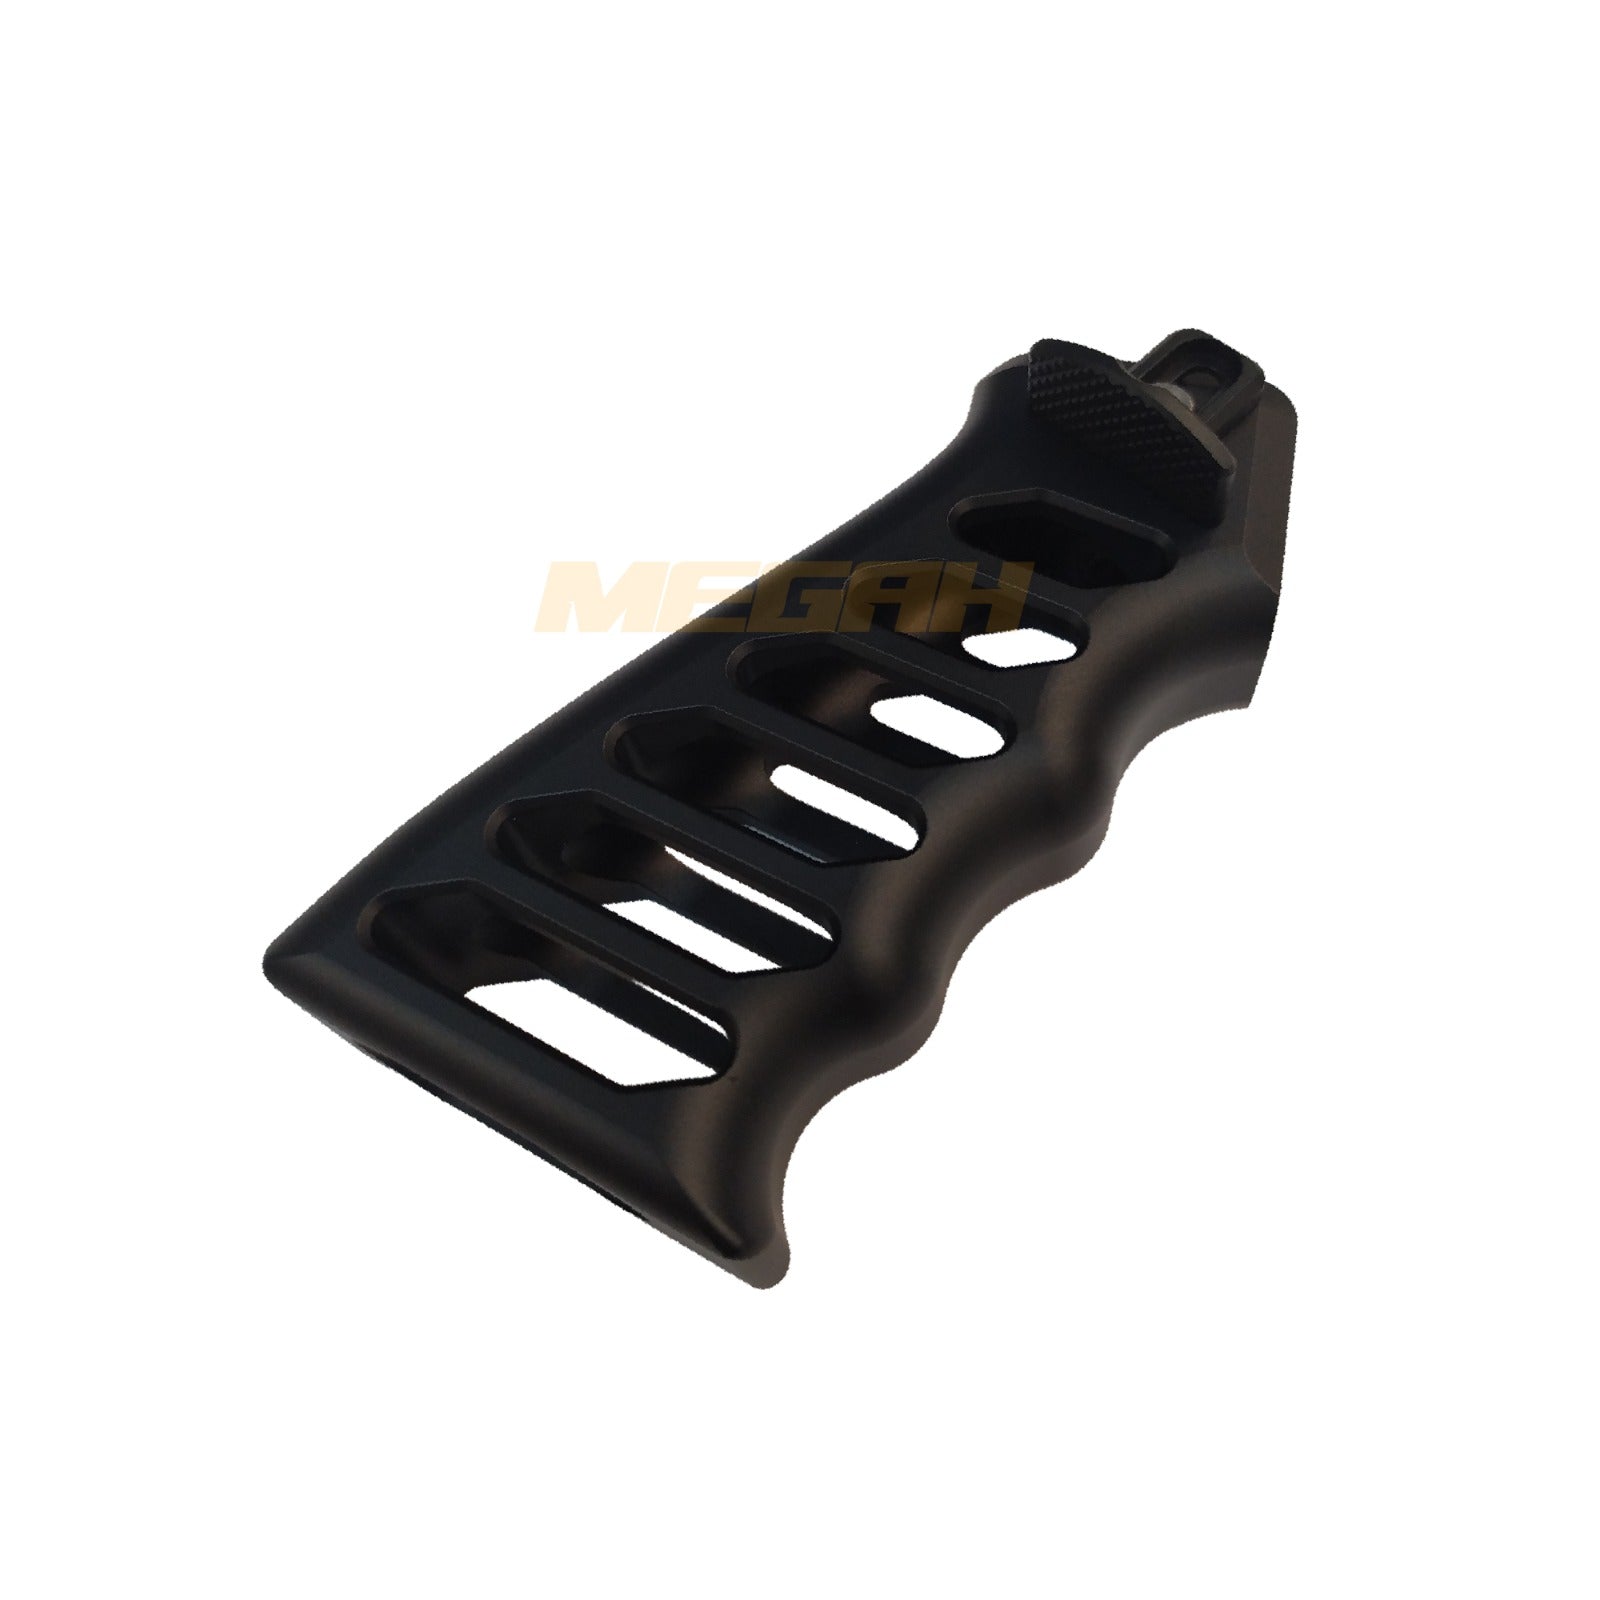 SABER TACTICAL AR STYLE GRIP WITH THUMB REST